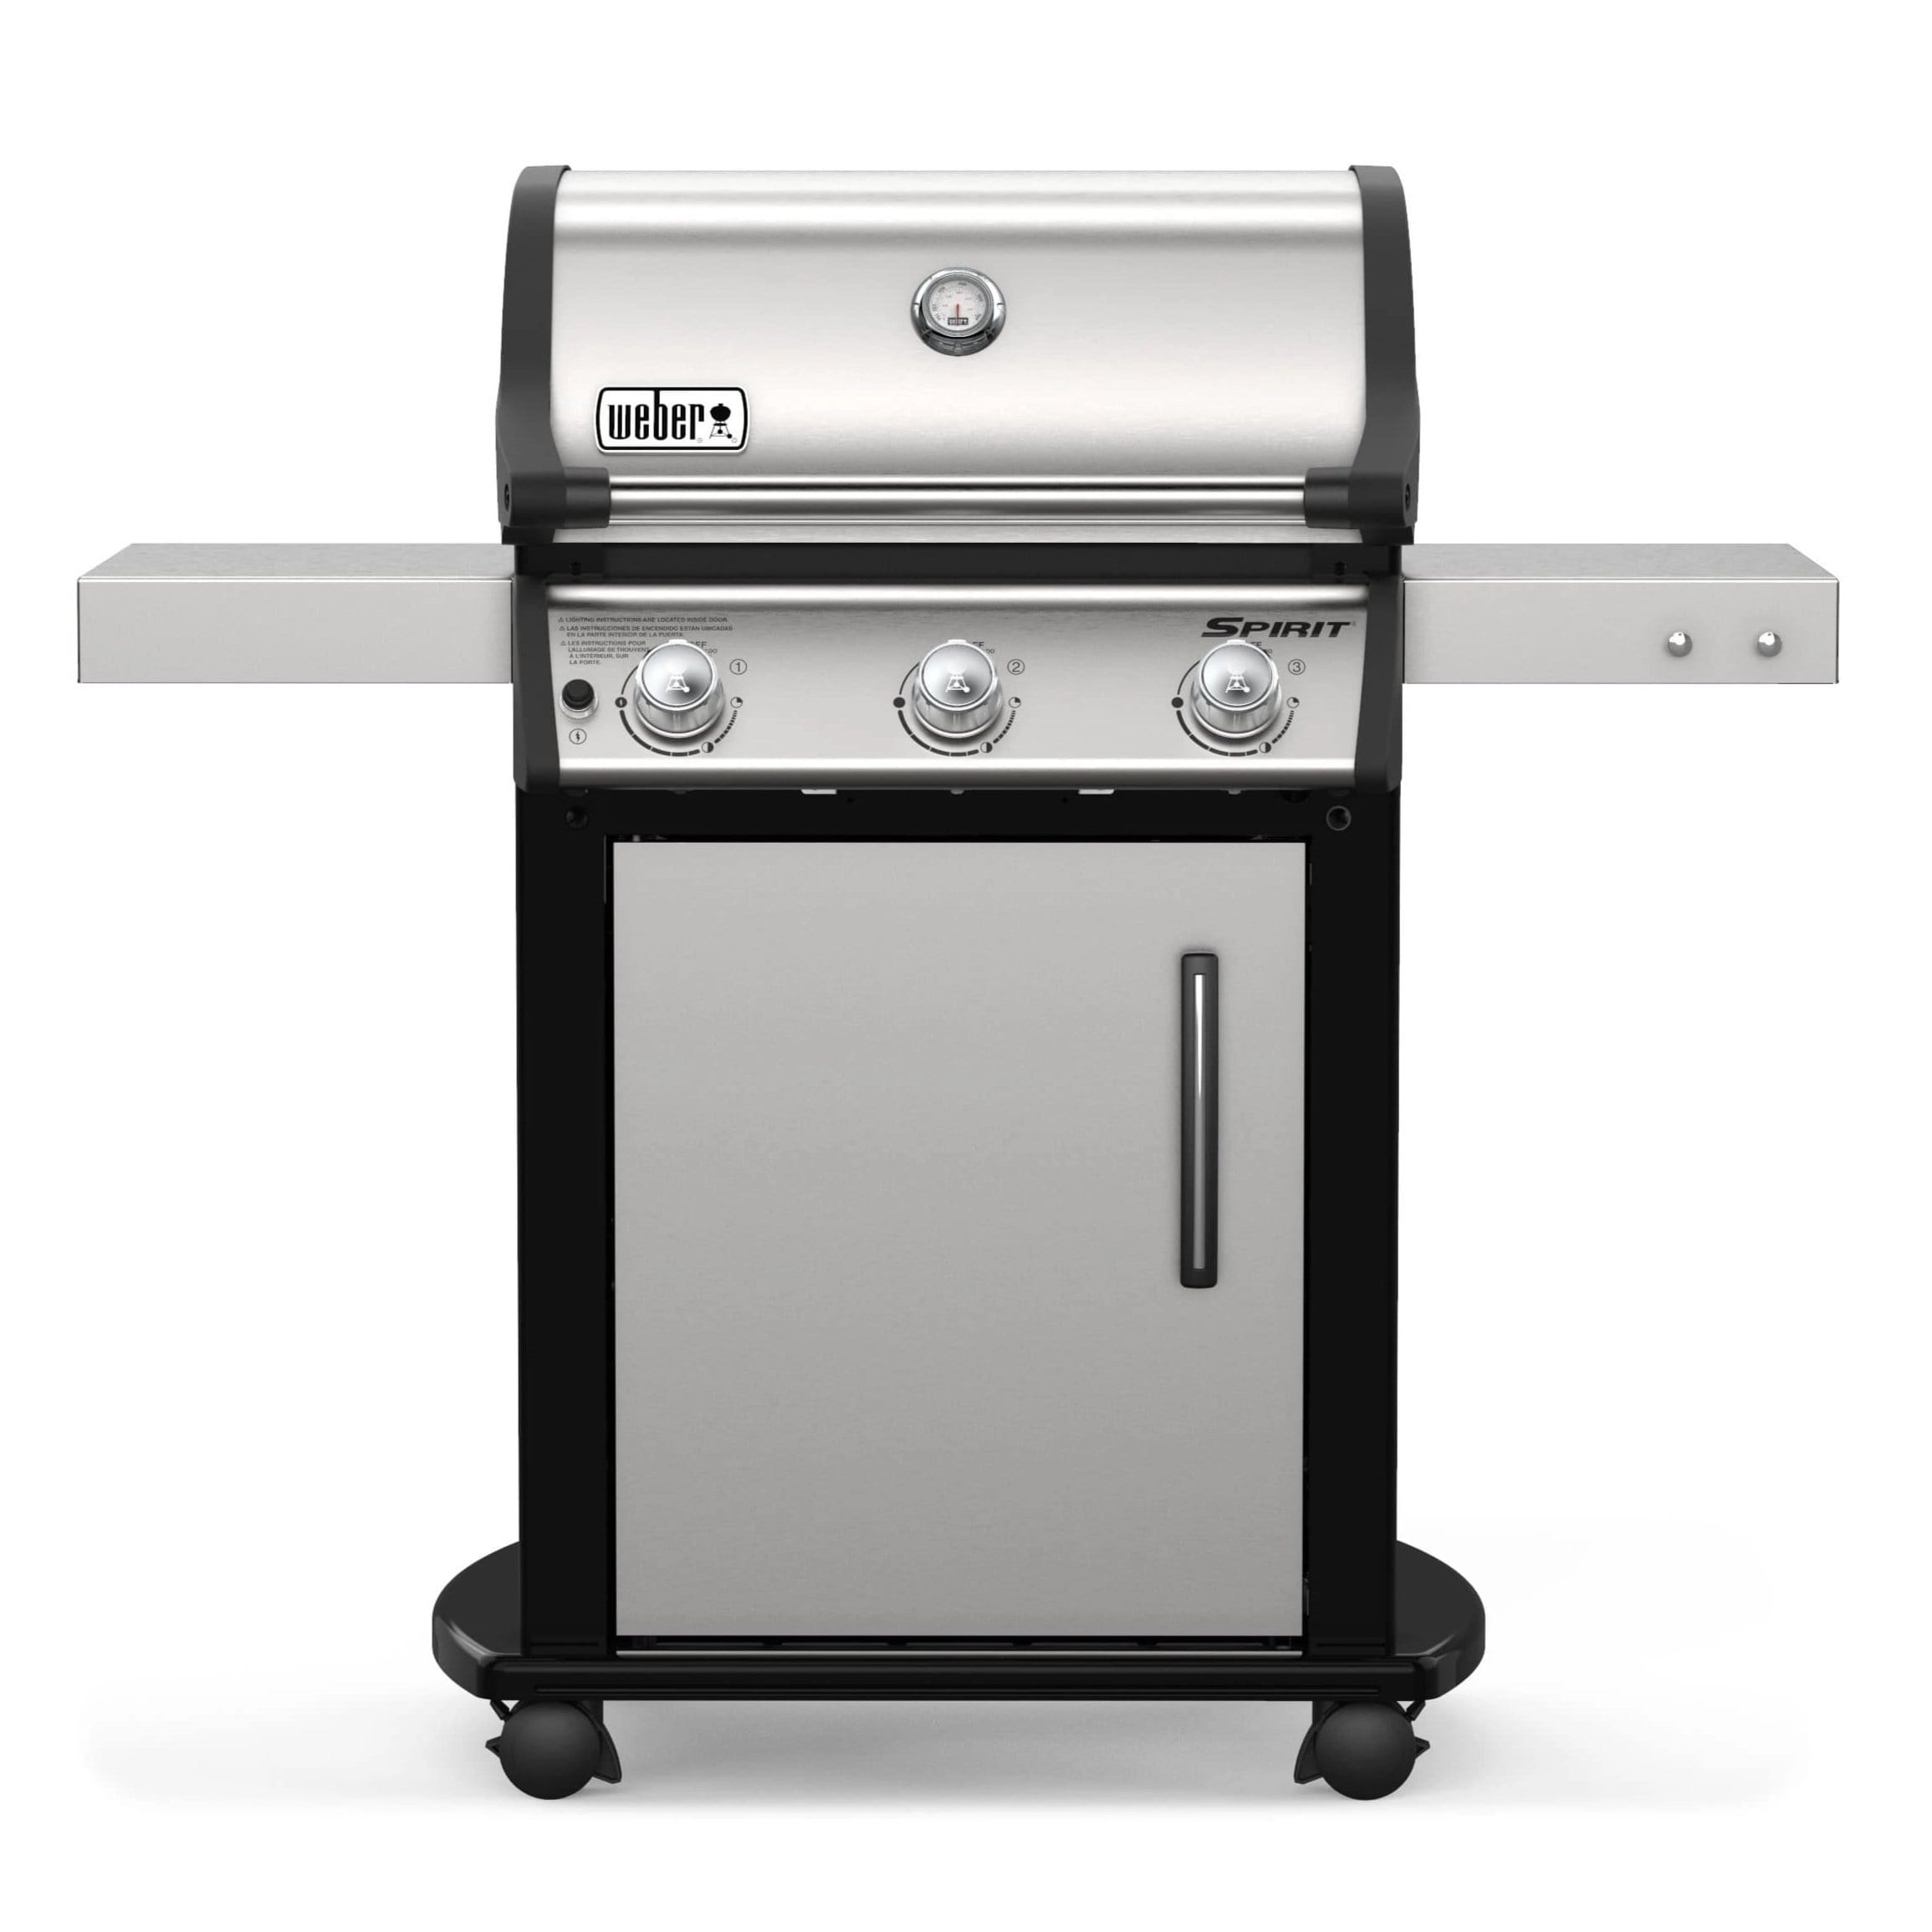 Weber Weber Spirit S-315 3-Burner BBQ in Stainless Steel with Cast-Iron Cooking Grates Propane / Stainless Steel 46502001 Freestanding Gas Grill 077924129827